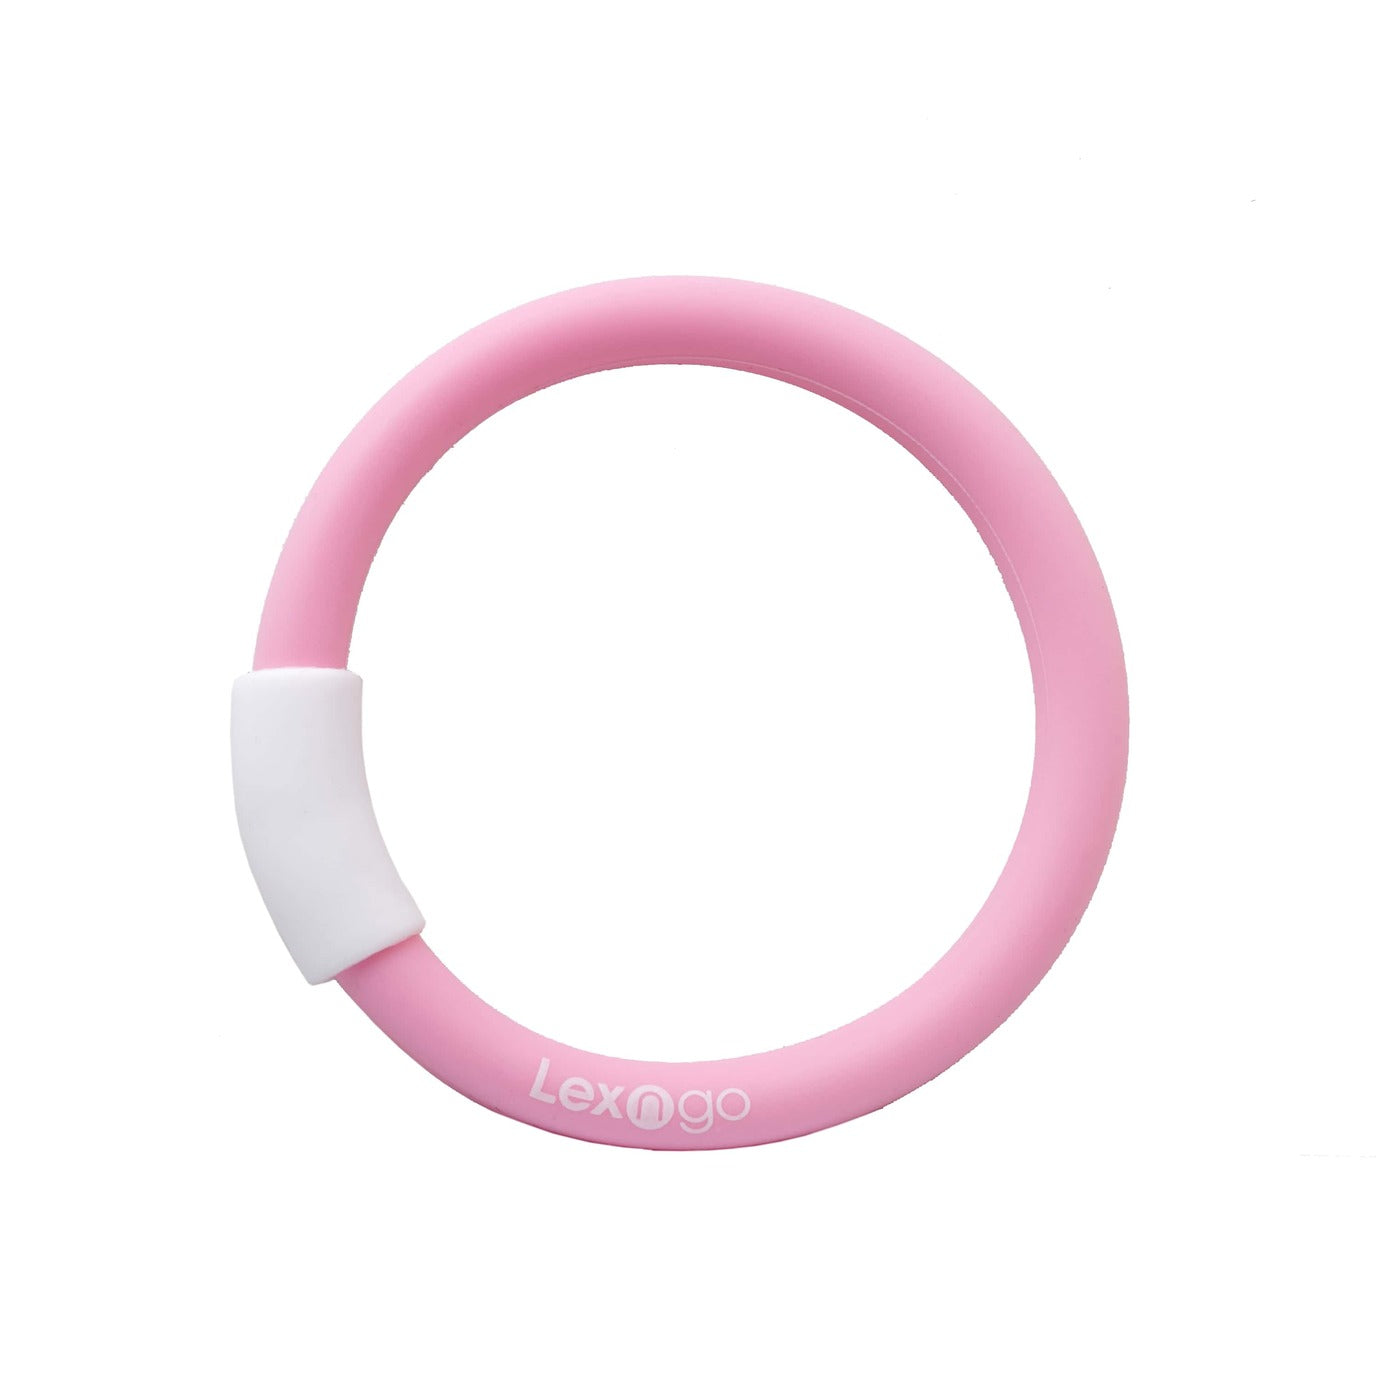 Silicone Resealable Straw Bracelet